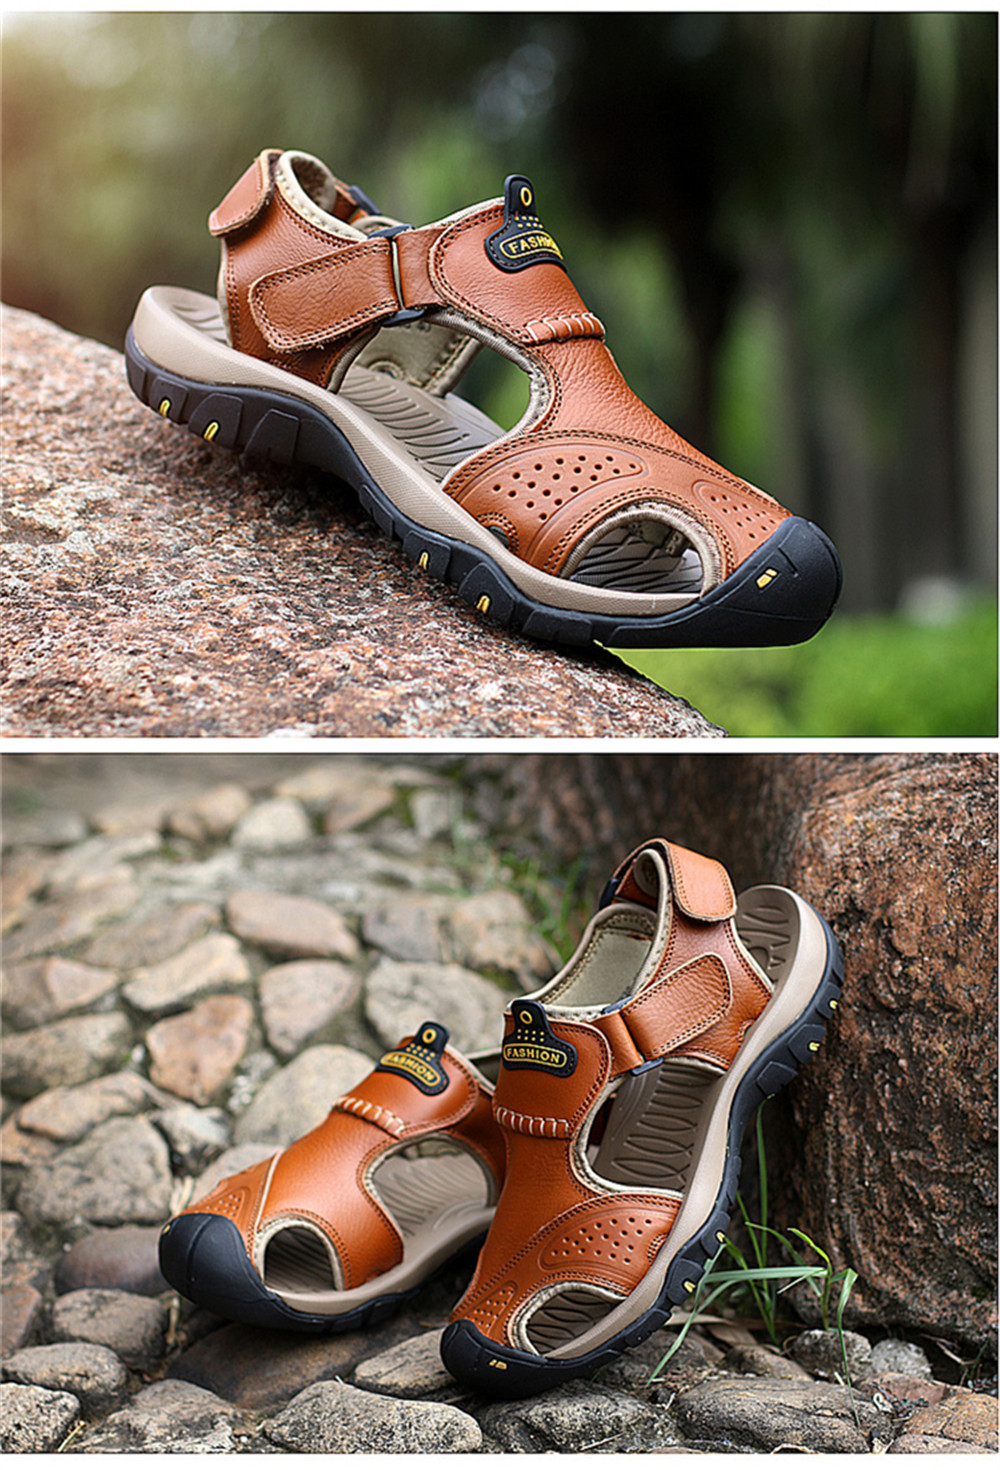 Men Summer Sandals Genuine Leather Casual Shoes Man Style Beach